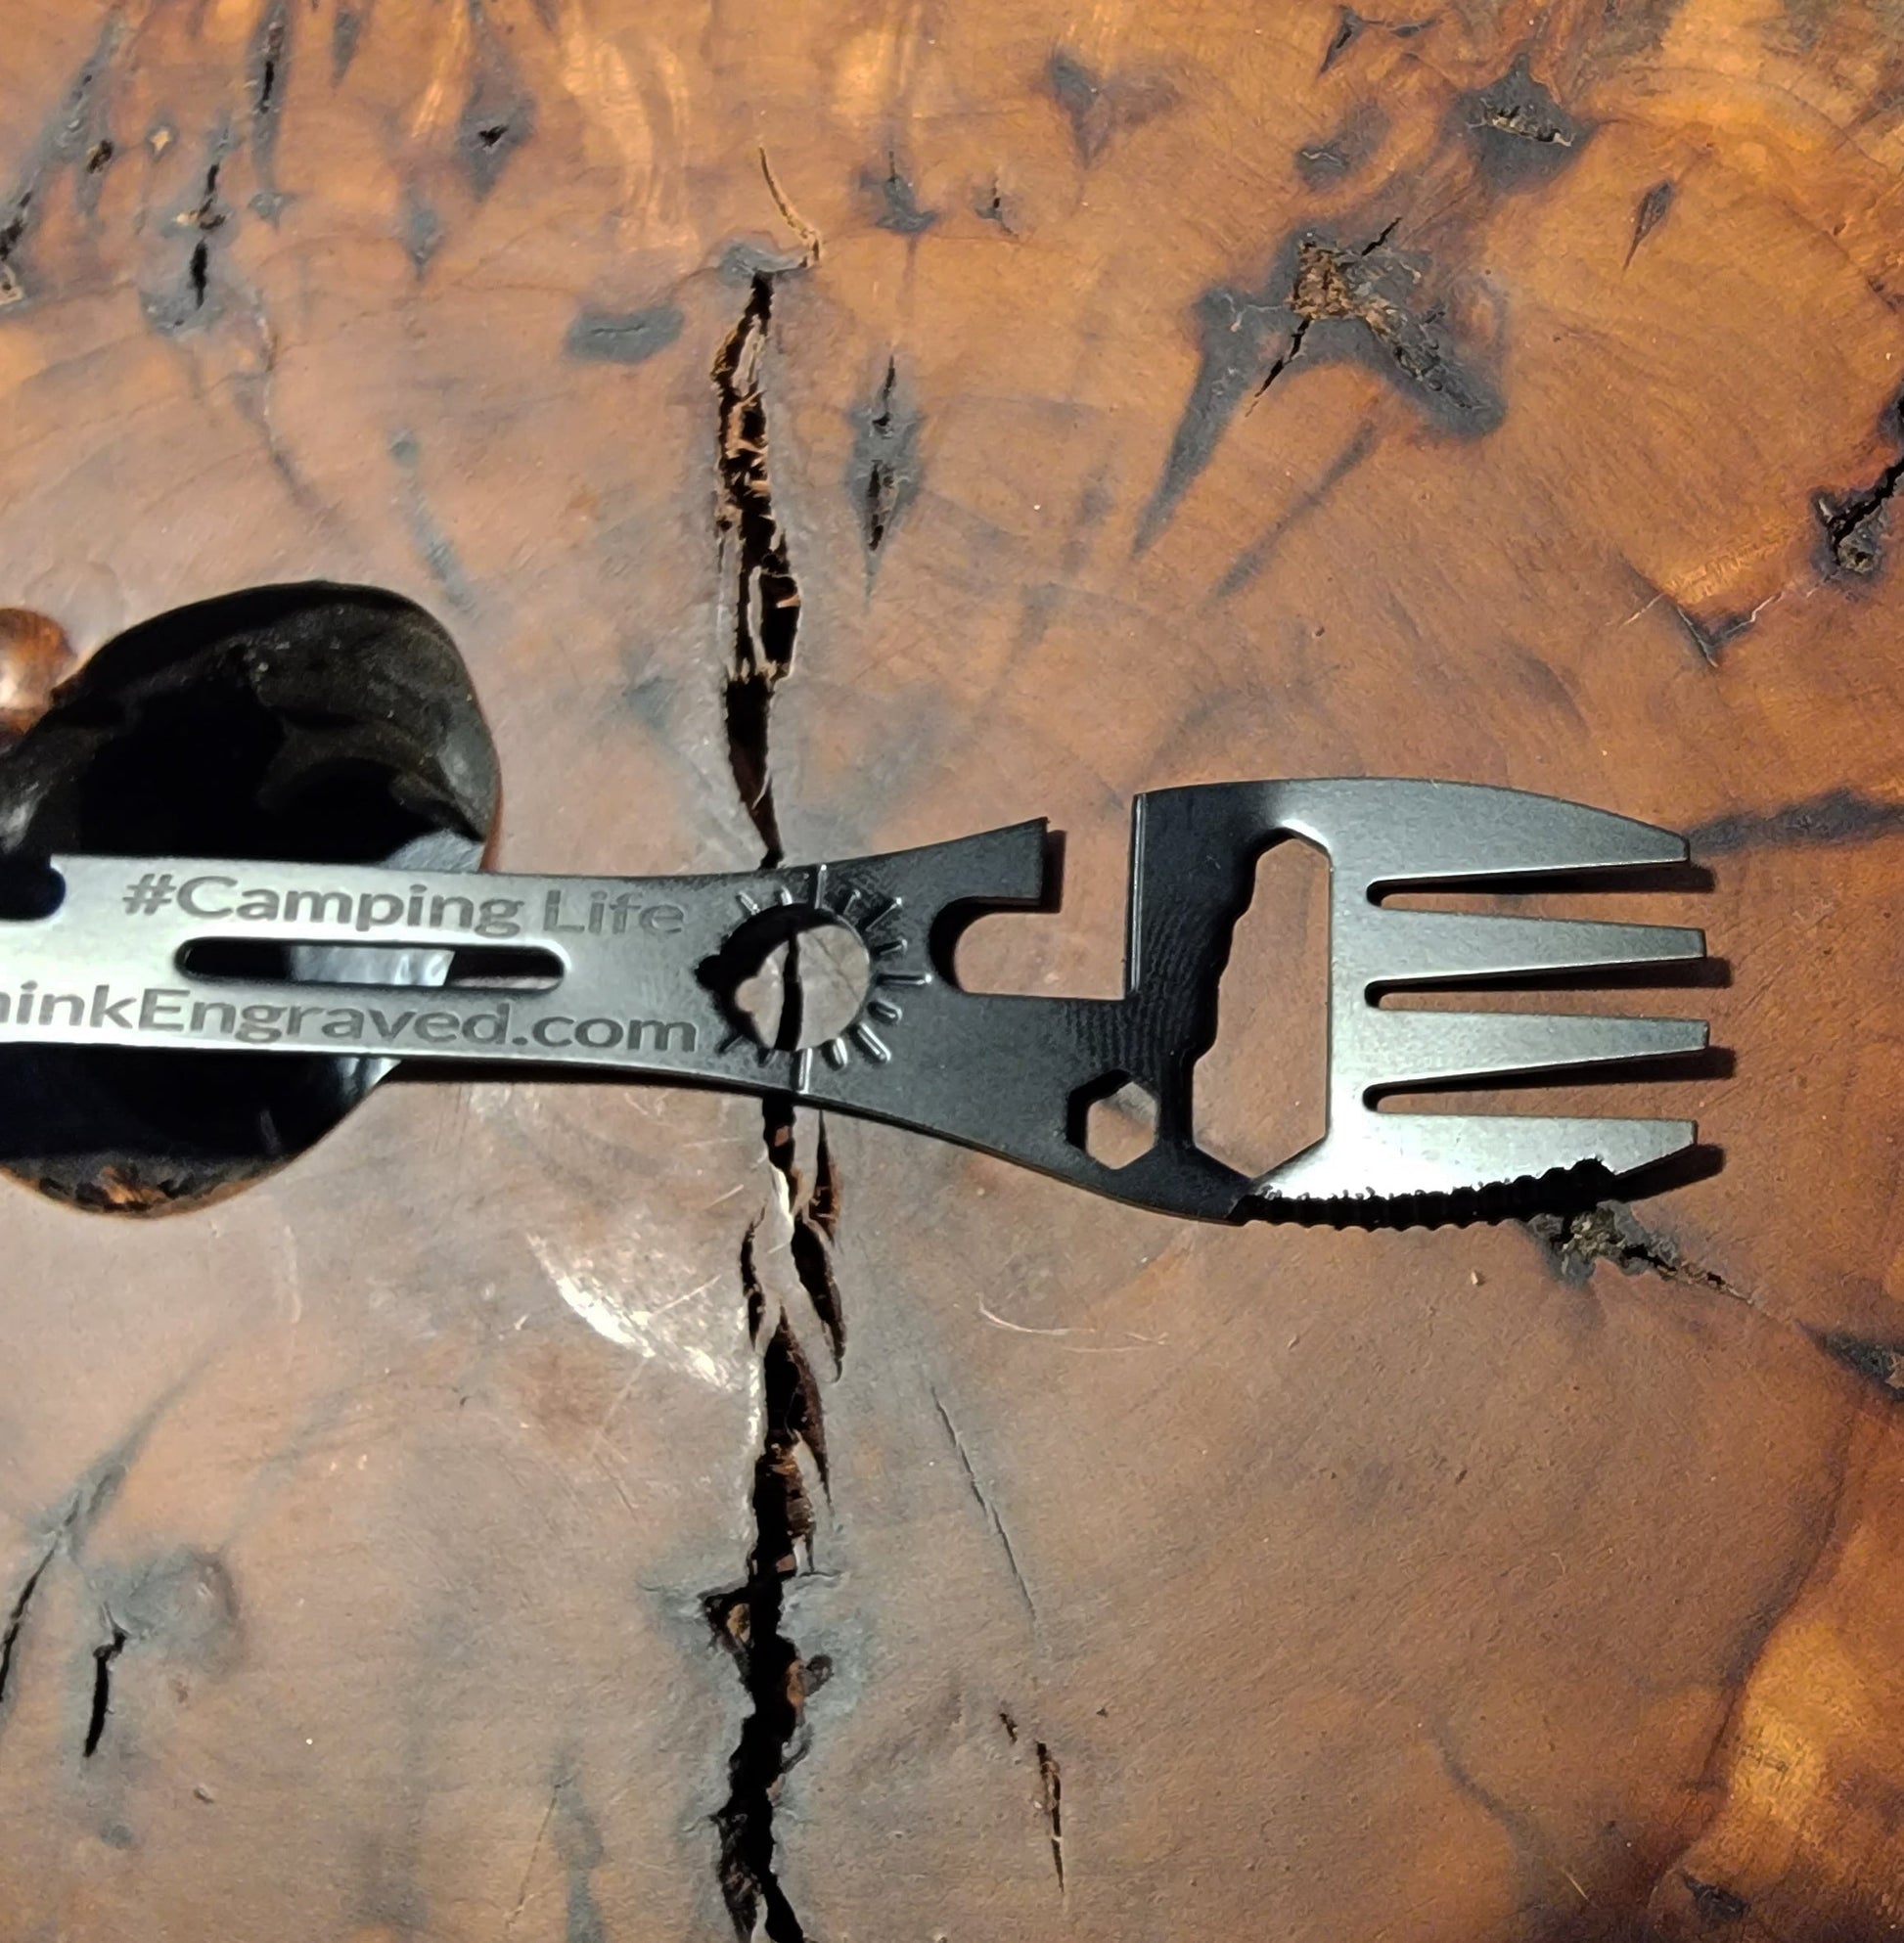 ThinkEngraved Personalized utensils Personalized 12 IN 1 Camping Spoon, Fork Multi Tool With a Wrench Knife and more